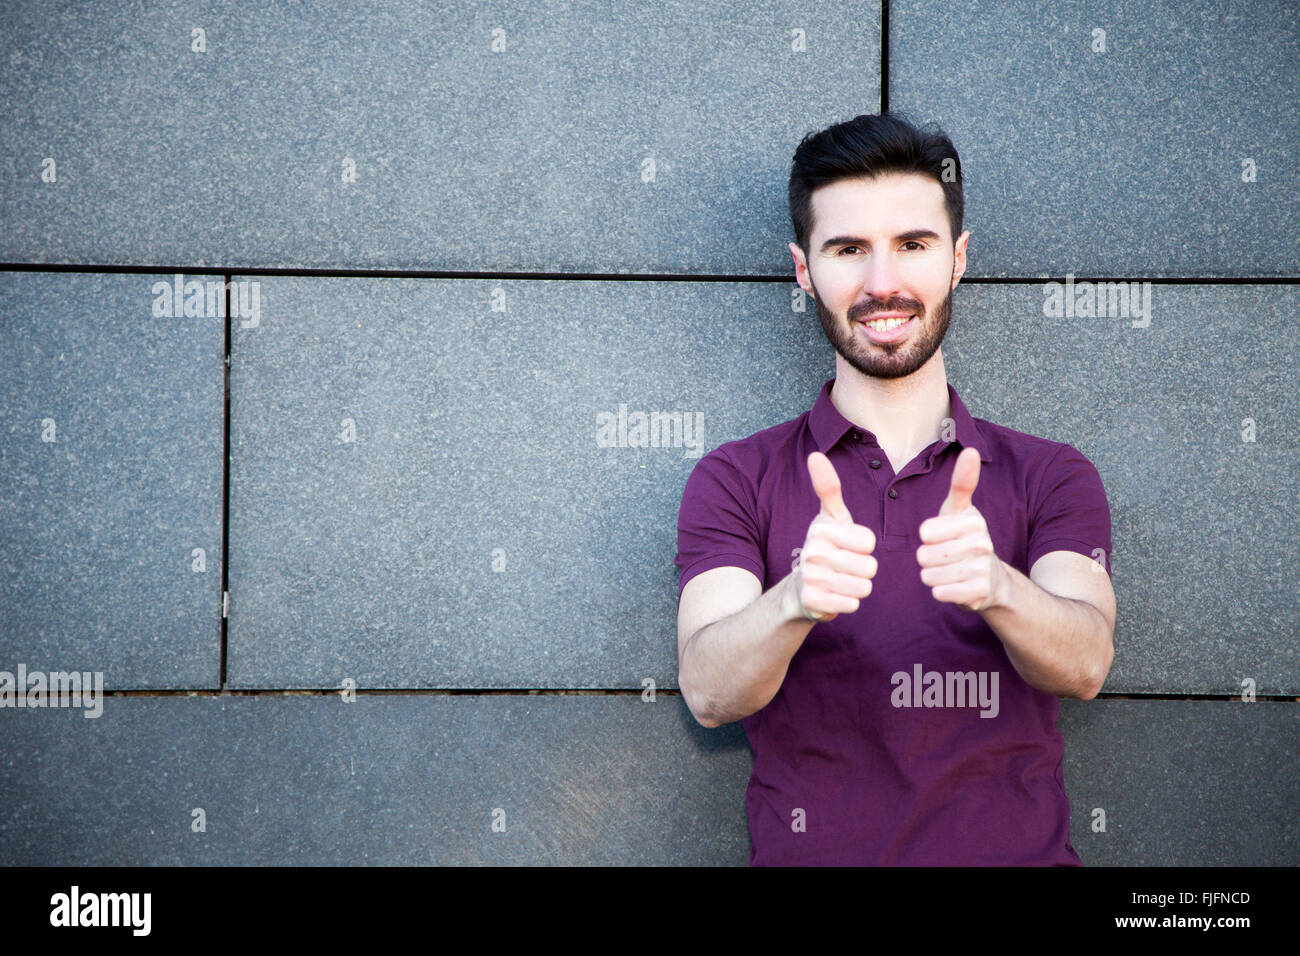 Portrait of an attractive young man Stock Photo